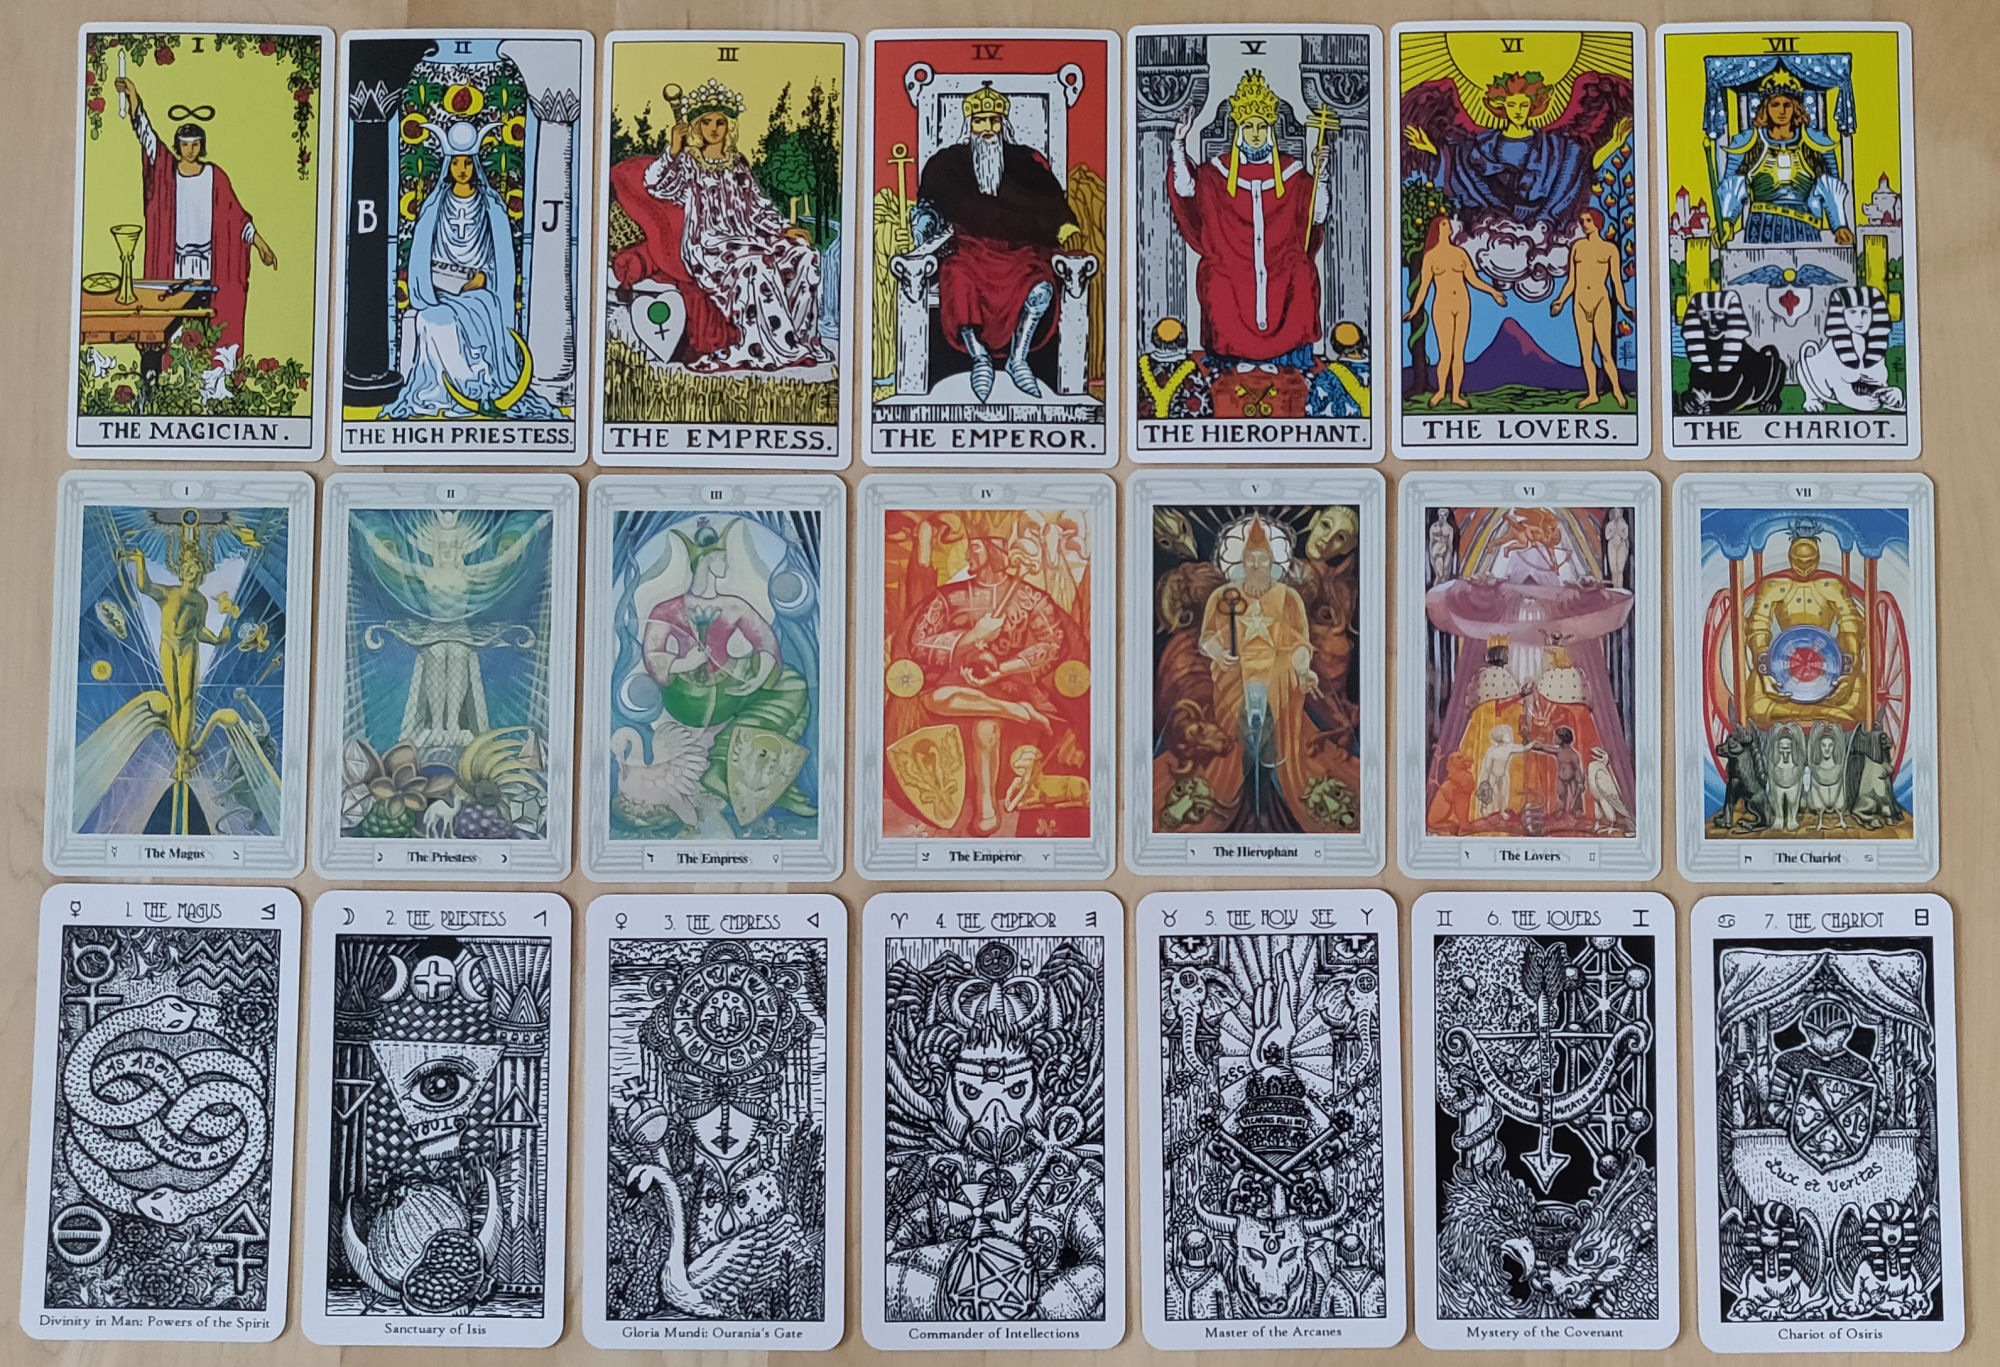 Mua Llewellyn's Complete Book of the Rider-Waite-Smith Tarot: A Journey Through the History, Meaning, and Use of the World's Most Famous Deck (Llewellyn's Complete Book Series, 12) trên Amazon Mỹ chín